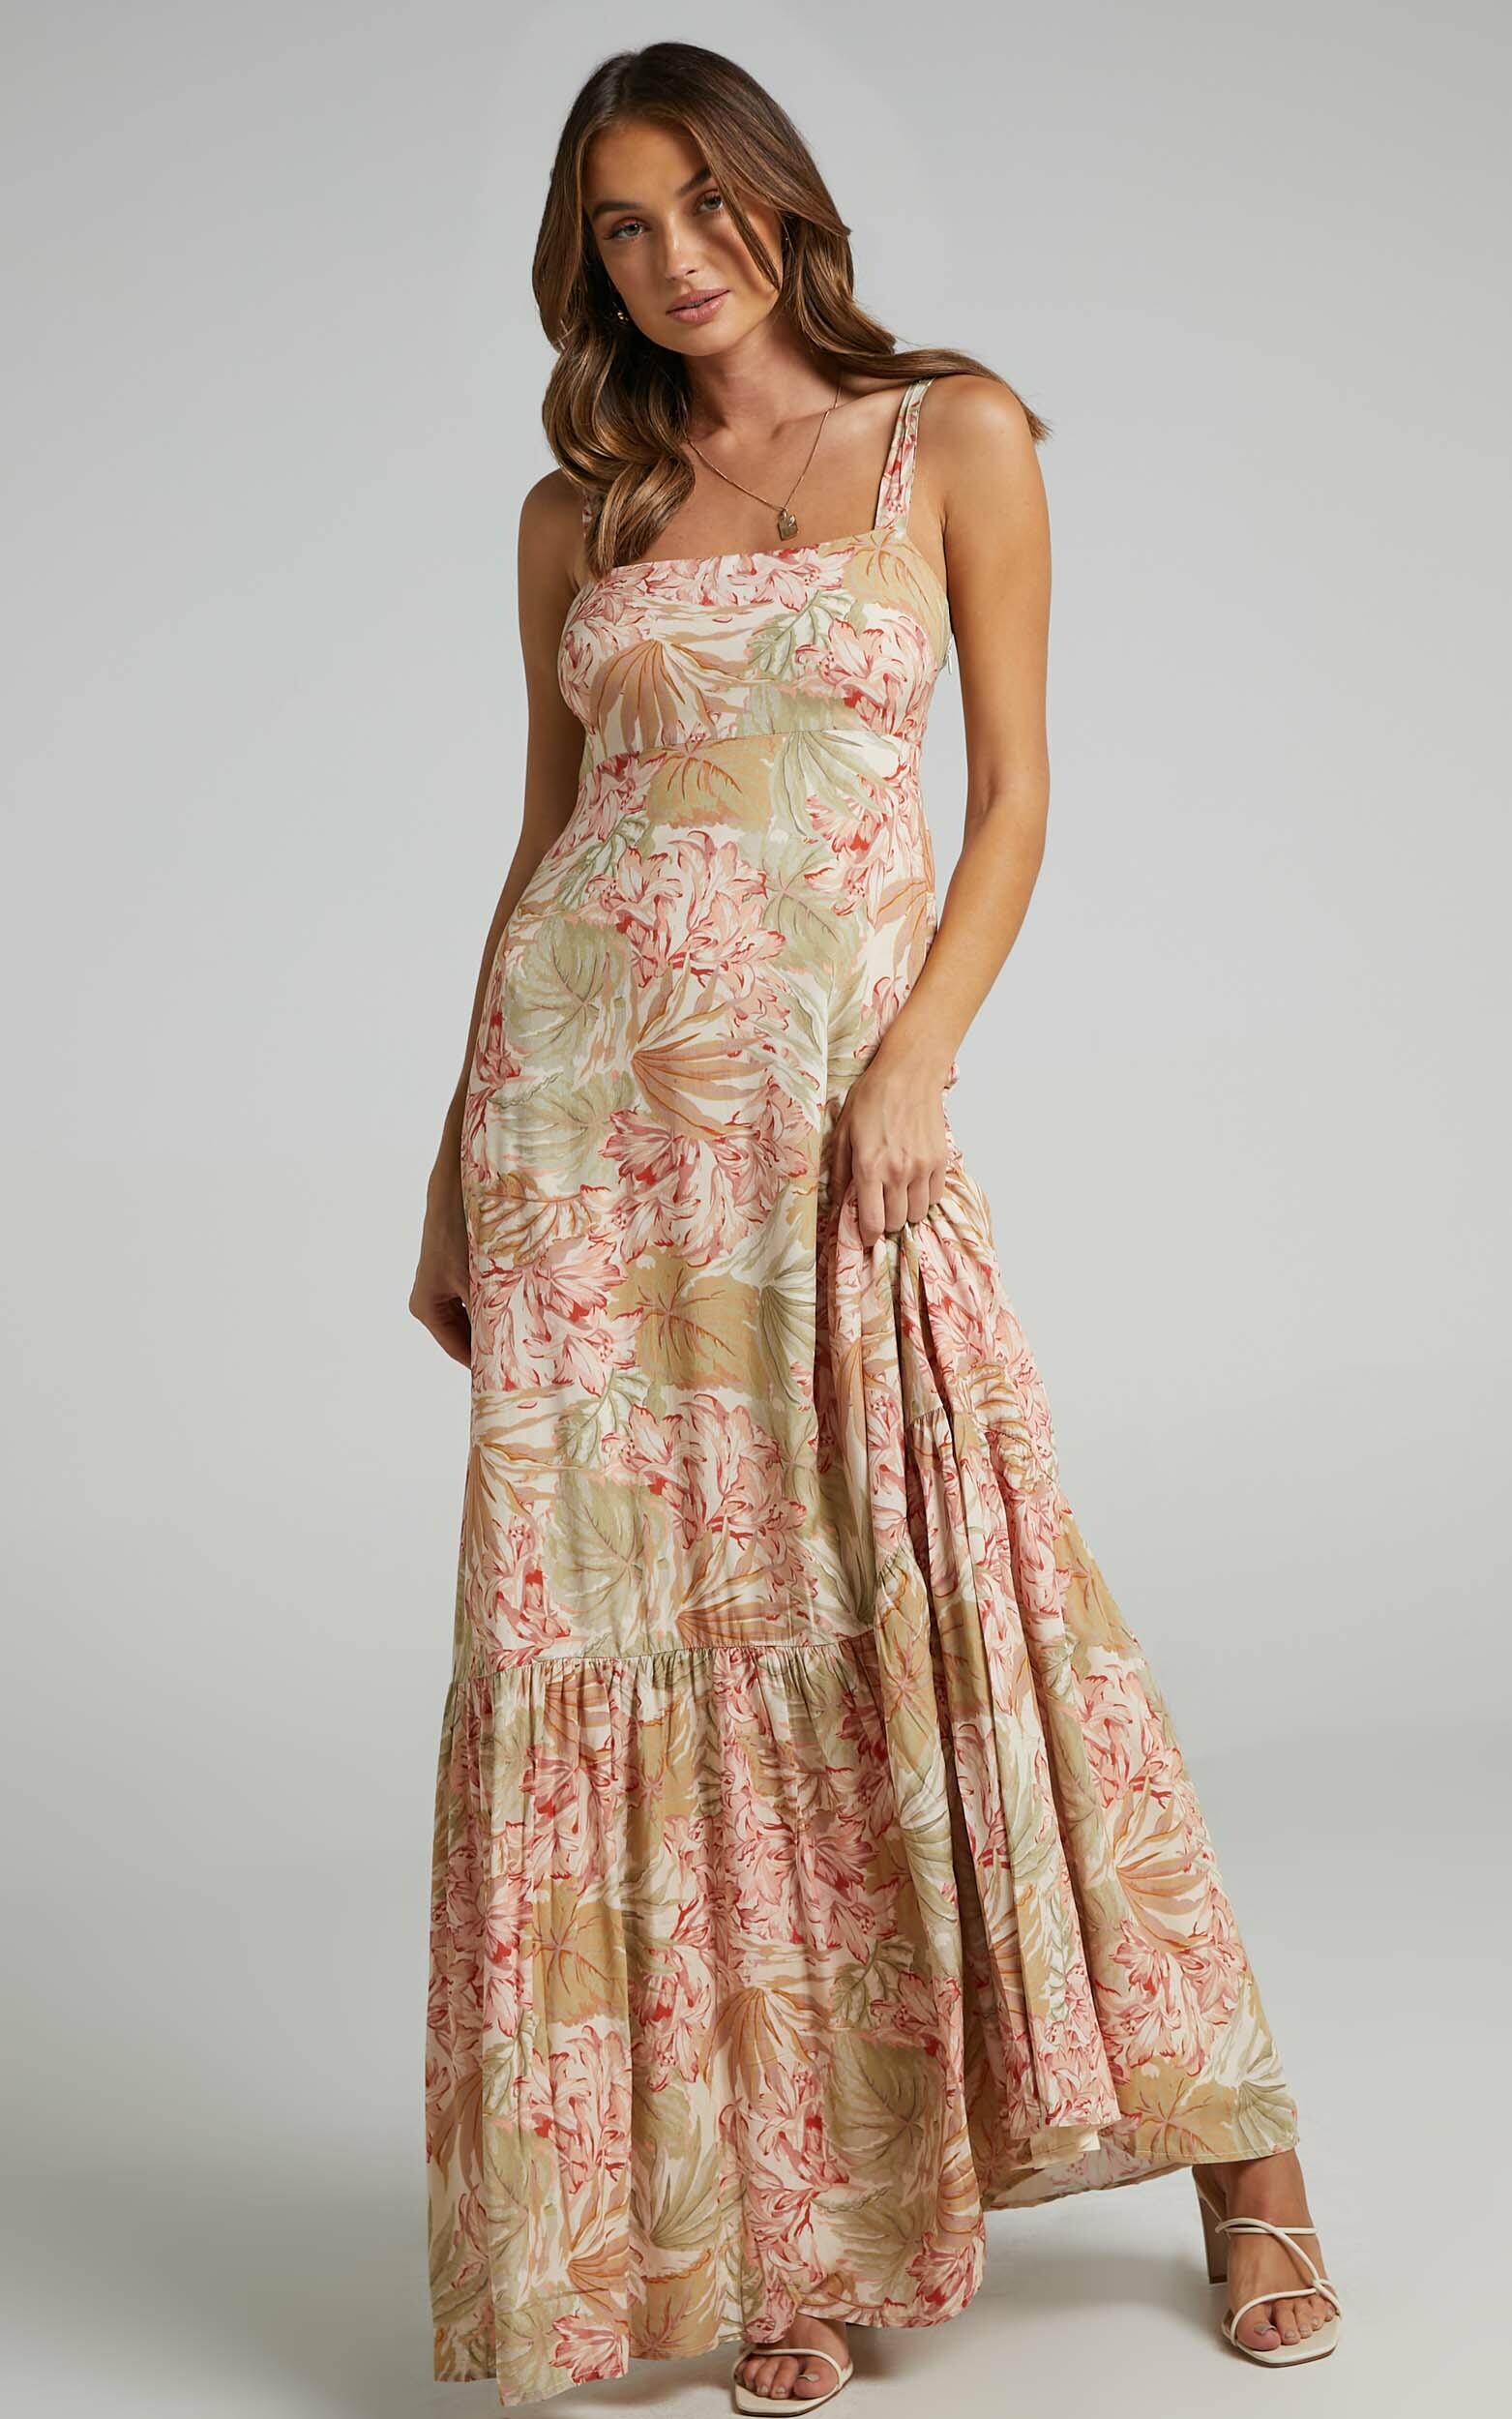 Honor Dress in Palm Print - 6 (XS), Multi, hi-res image number null